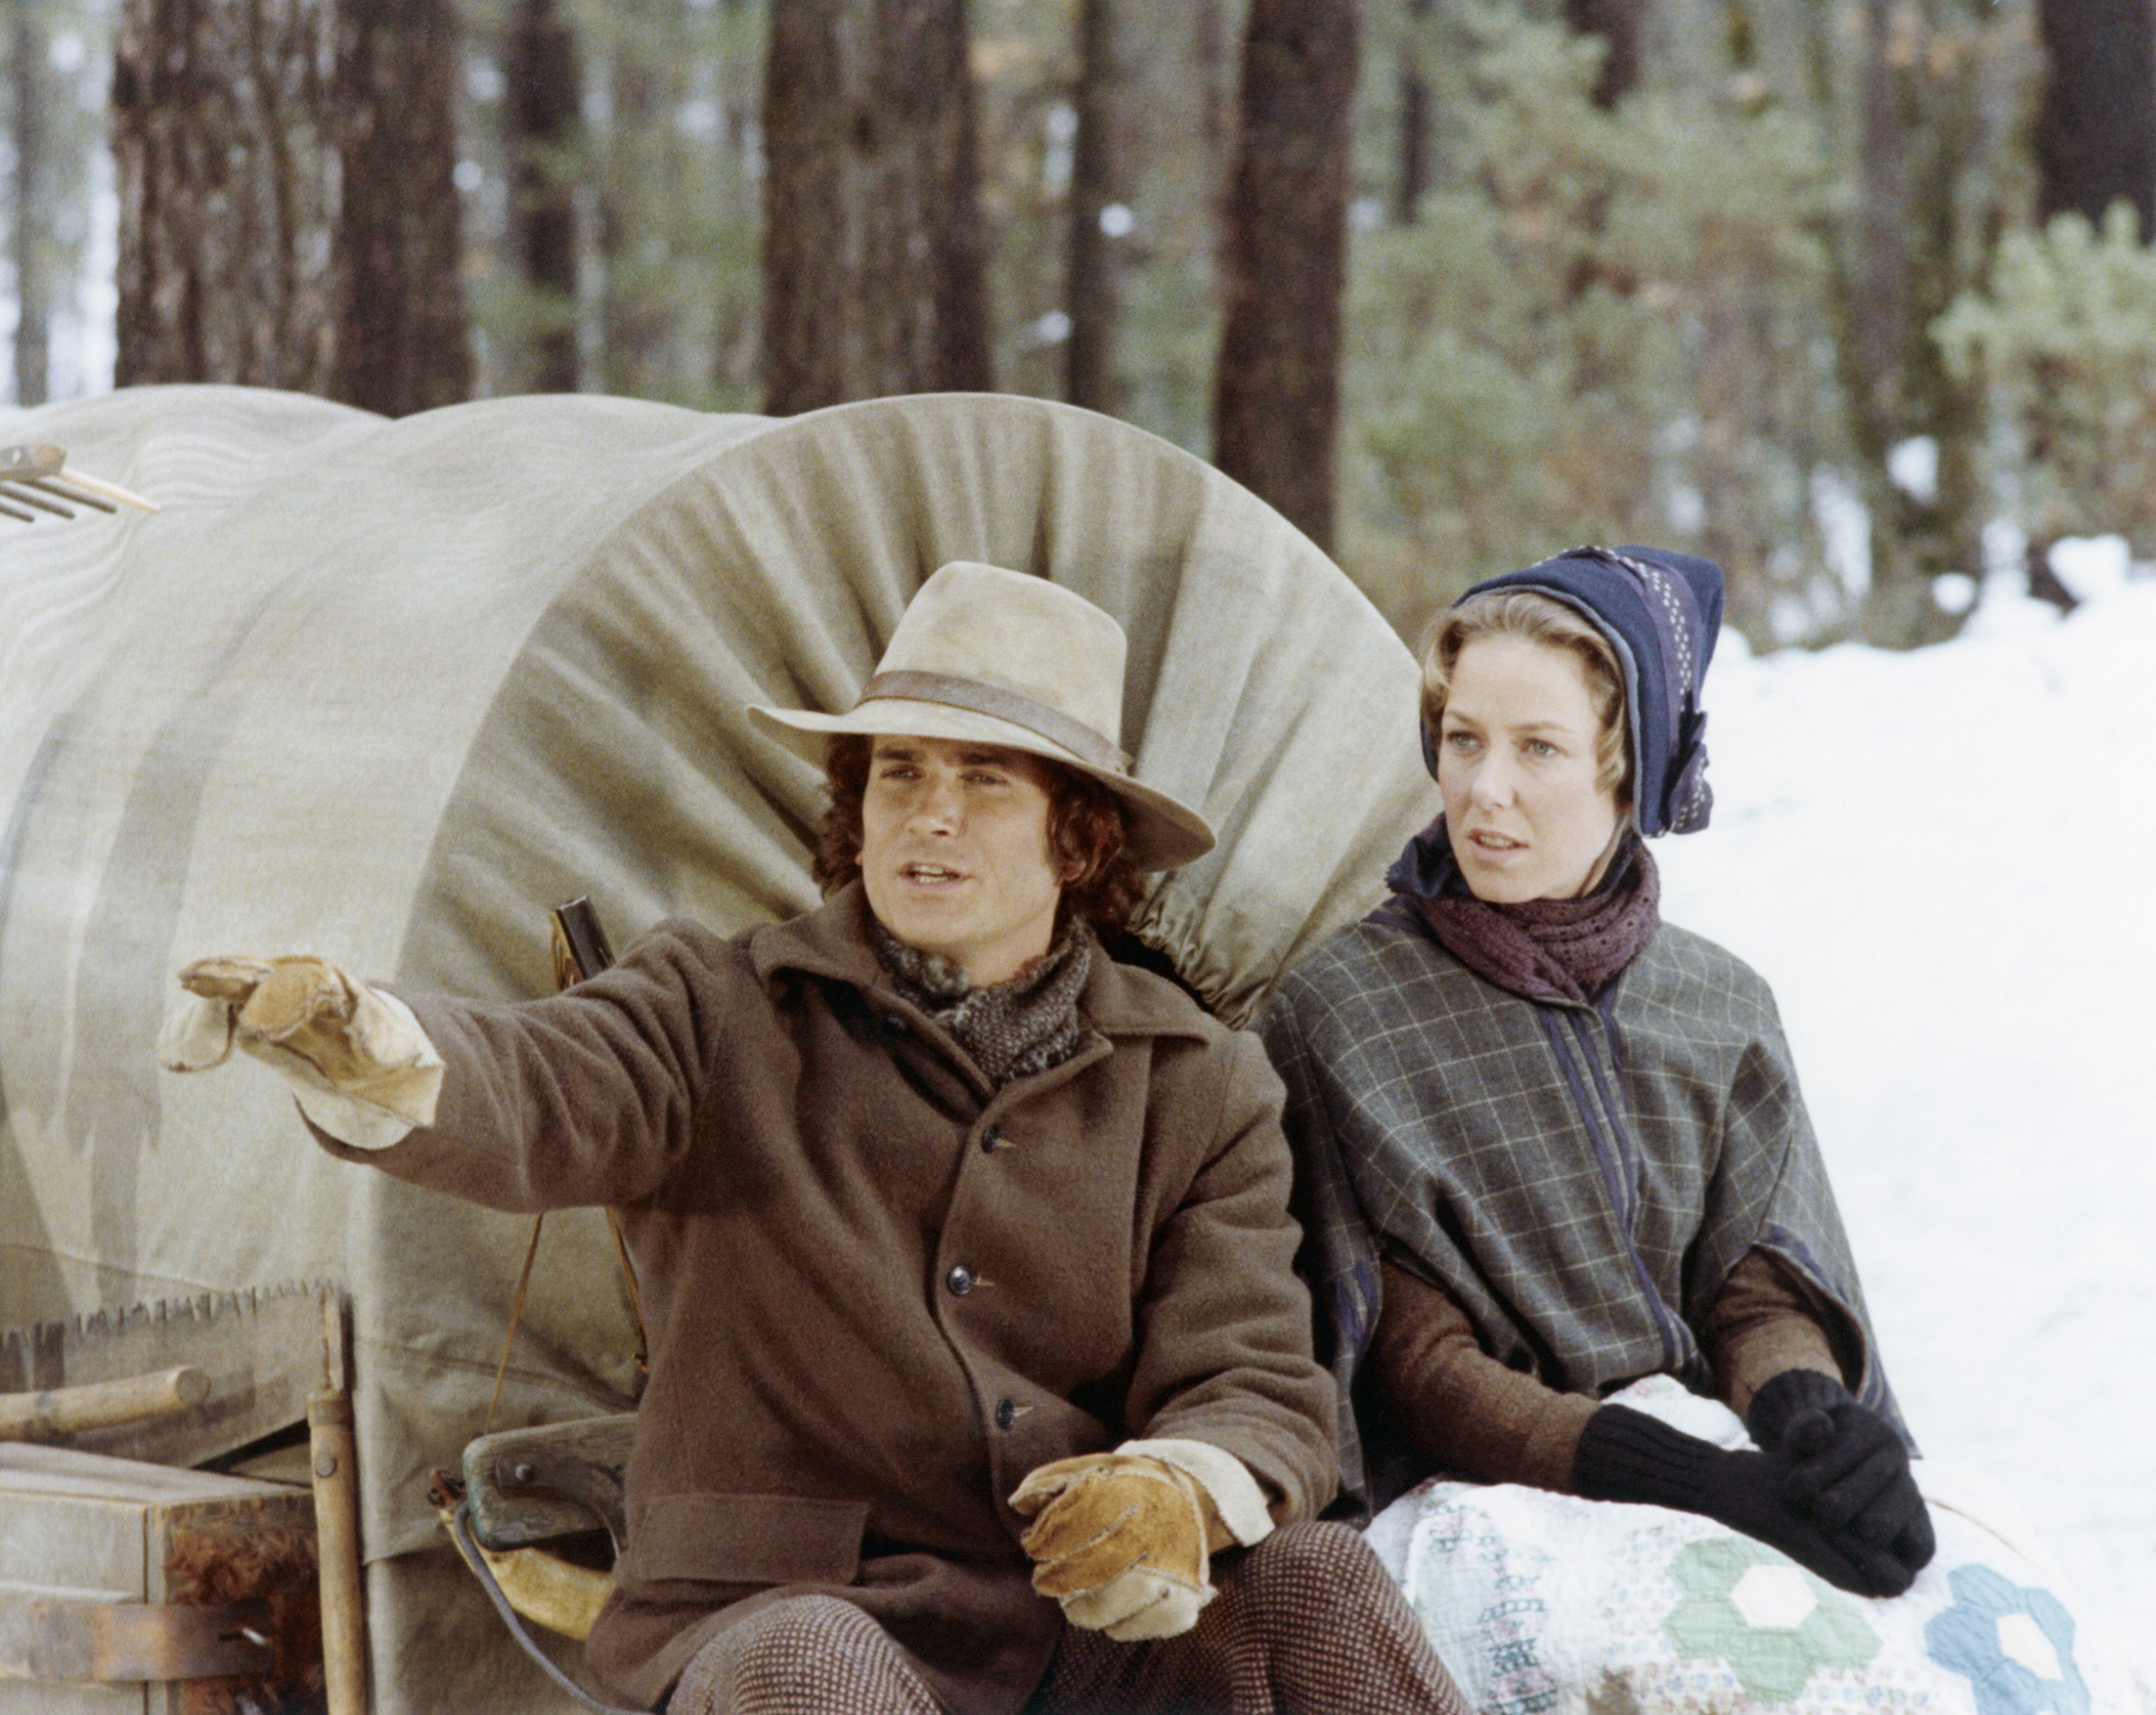 Michael Landon as Charles Ingalls and Karen Grassle as Caroline Ingalls sit in a wagon on Little House in the Prairie.